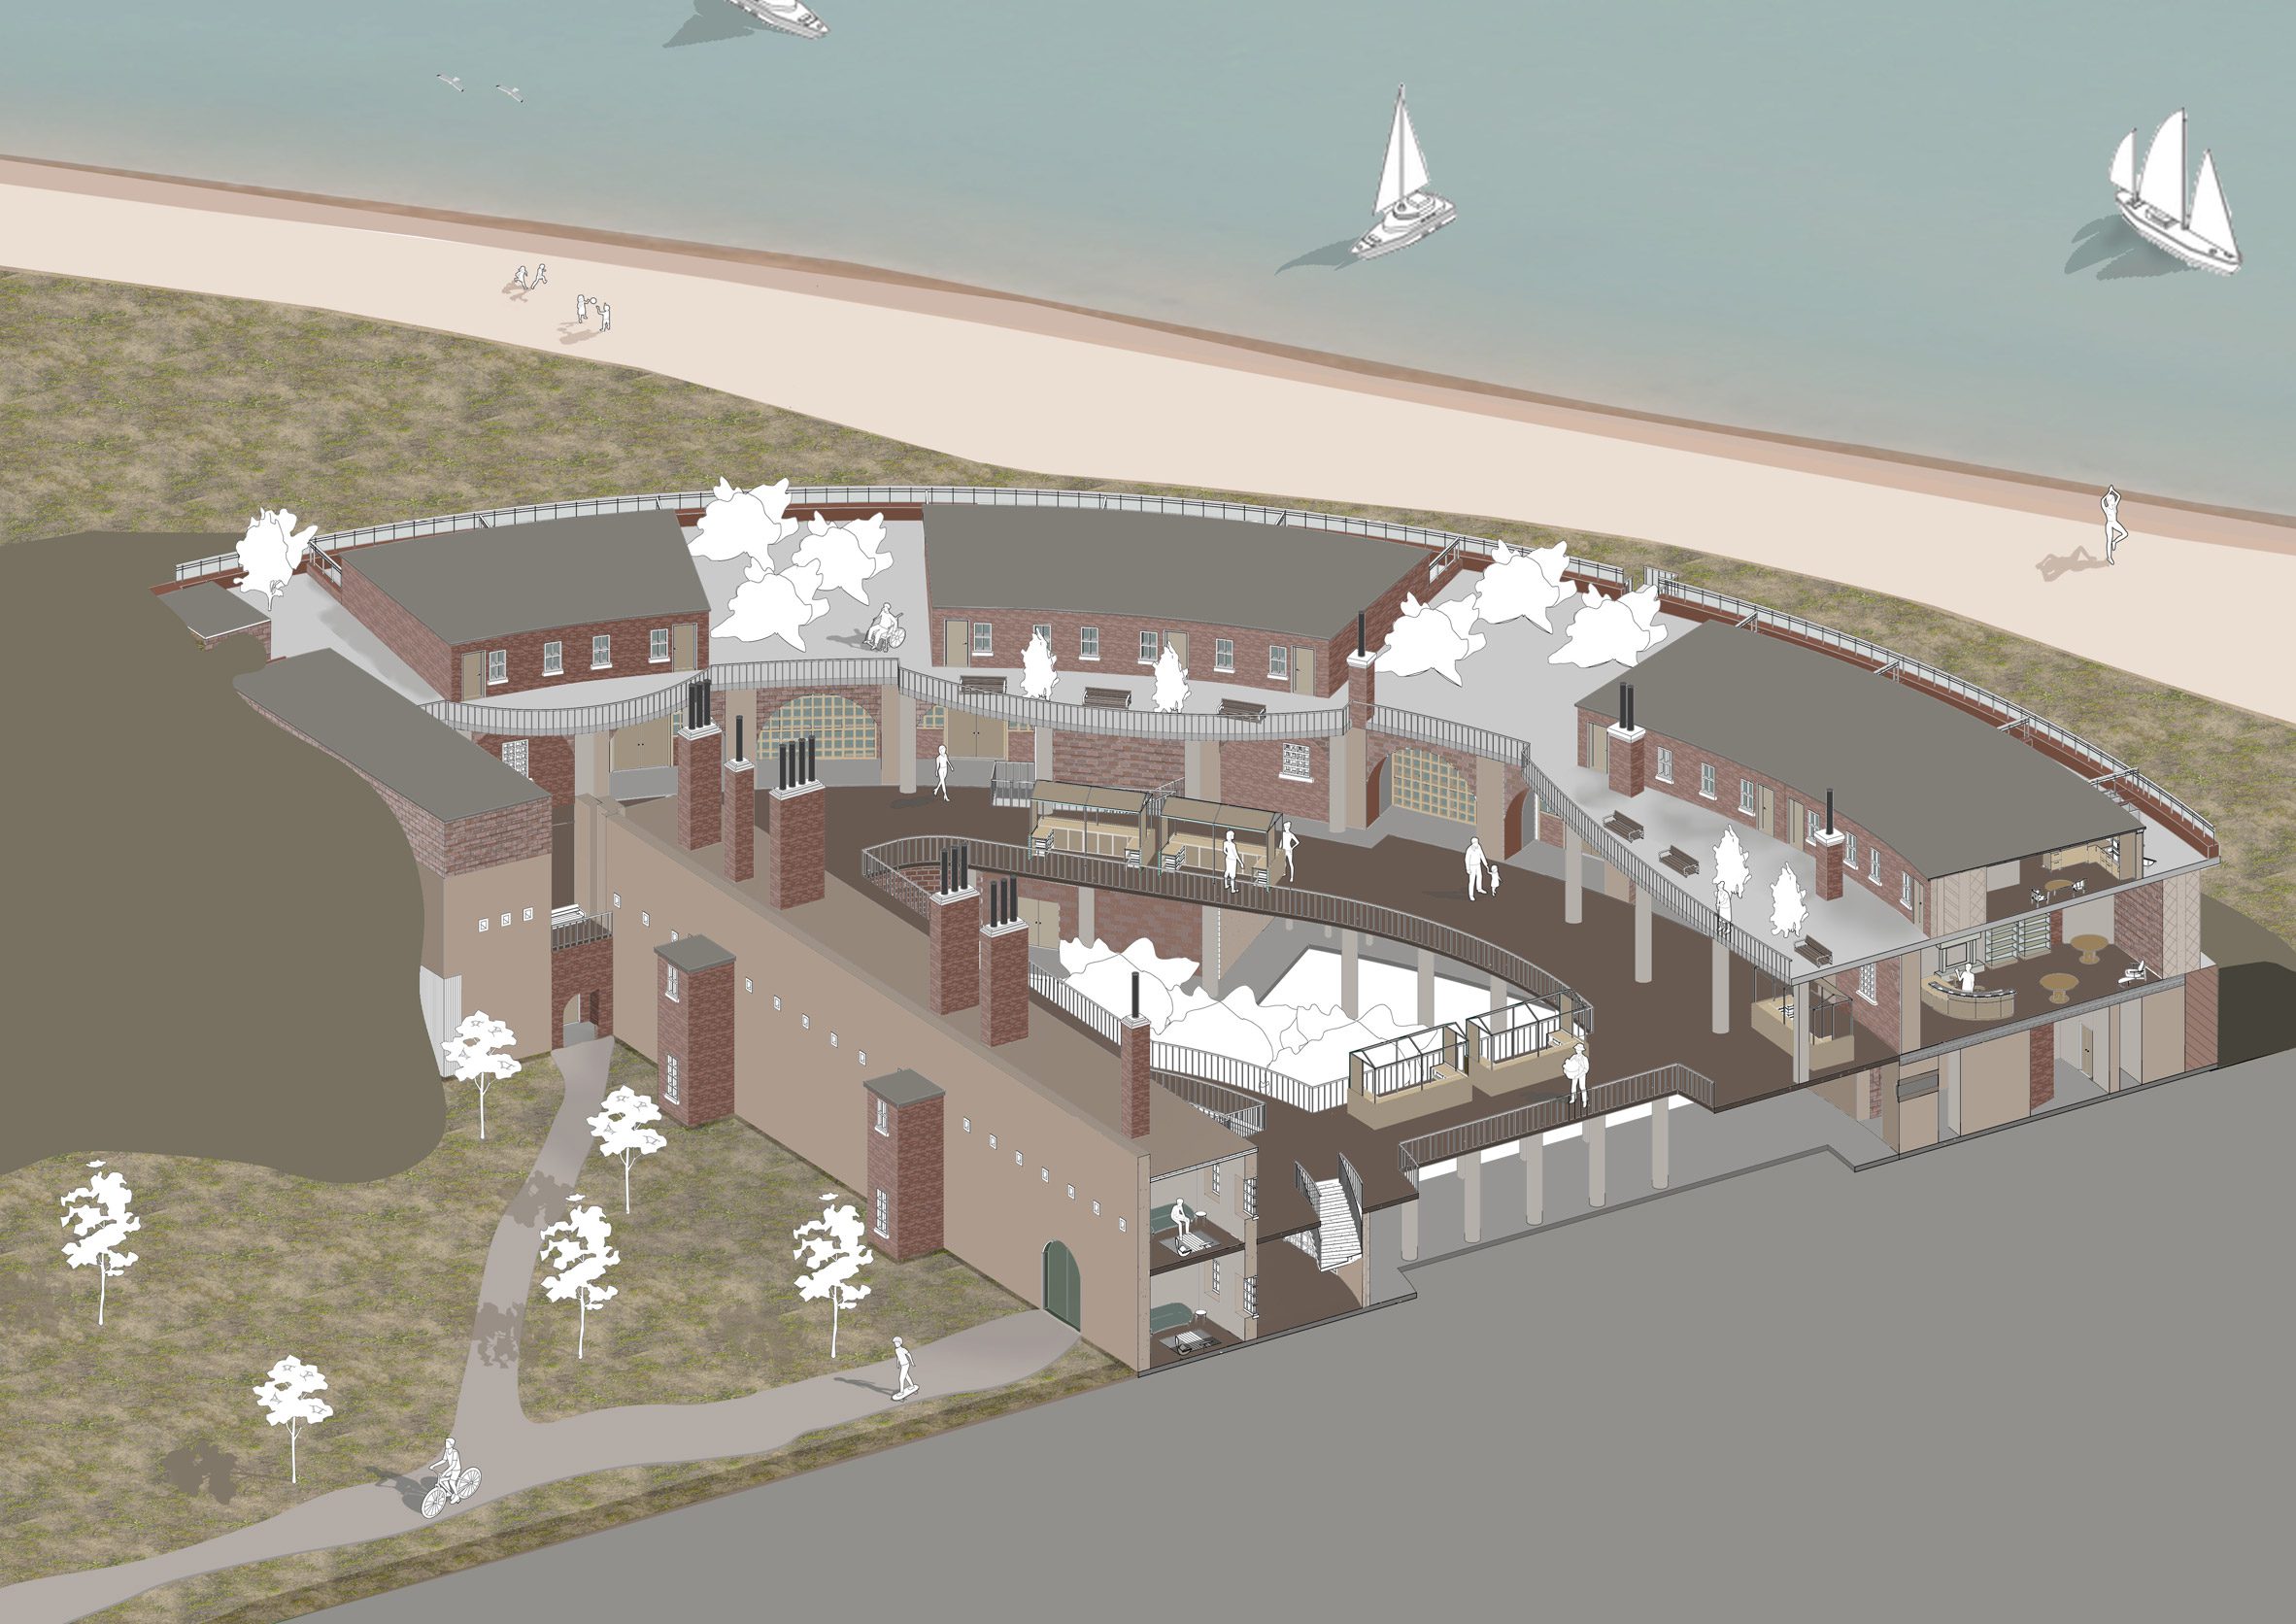 Visualisation showing mixed-use tourism site by sea